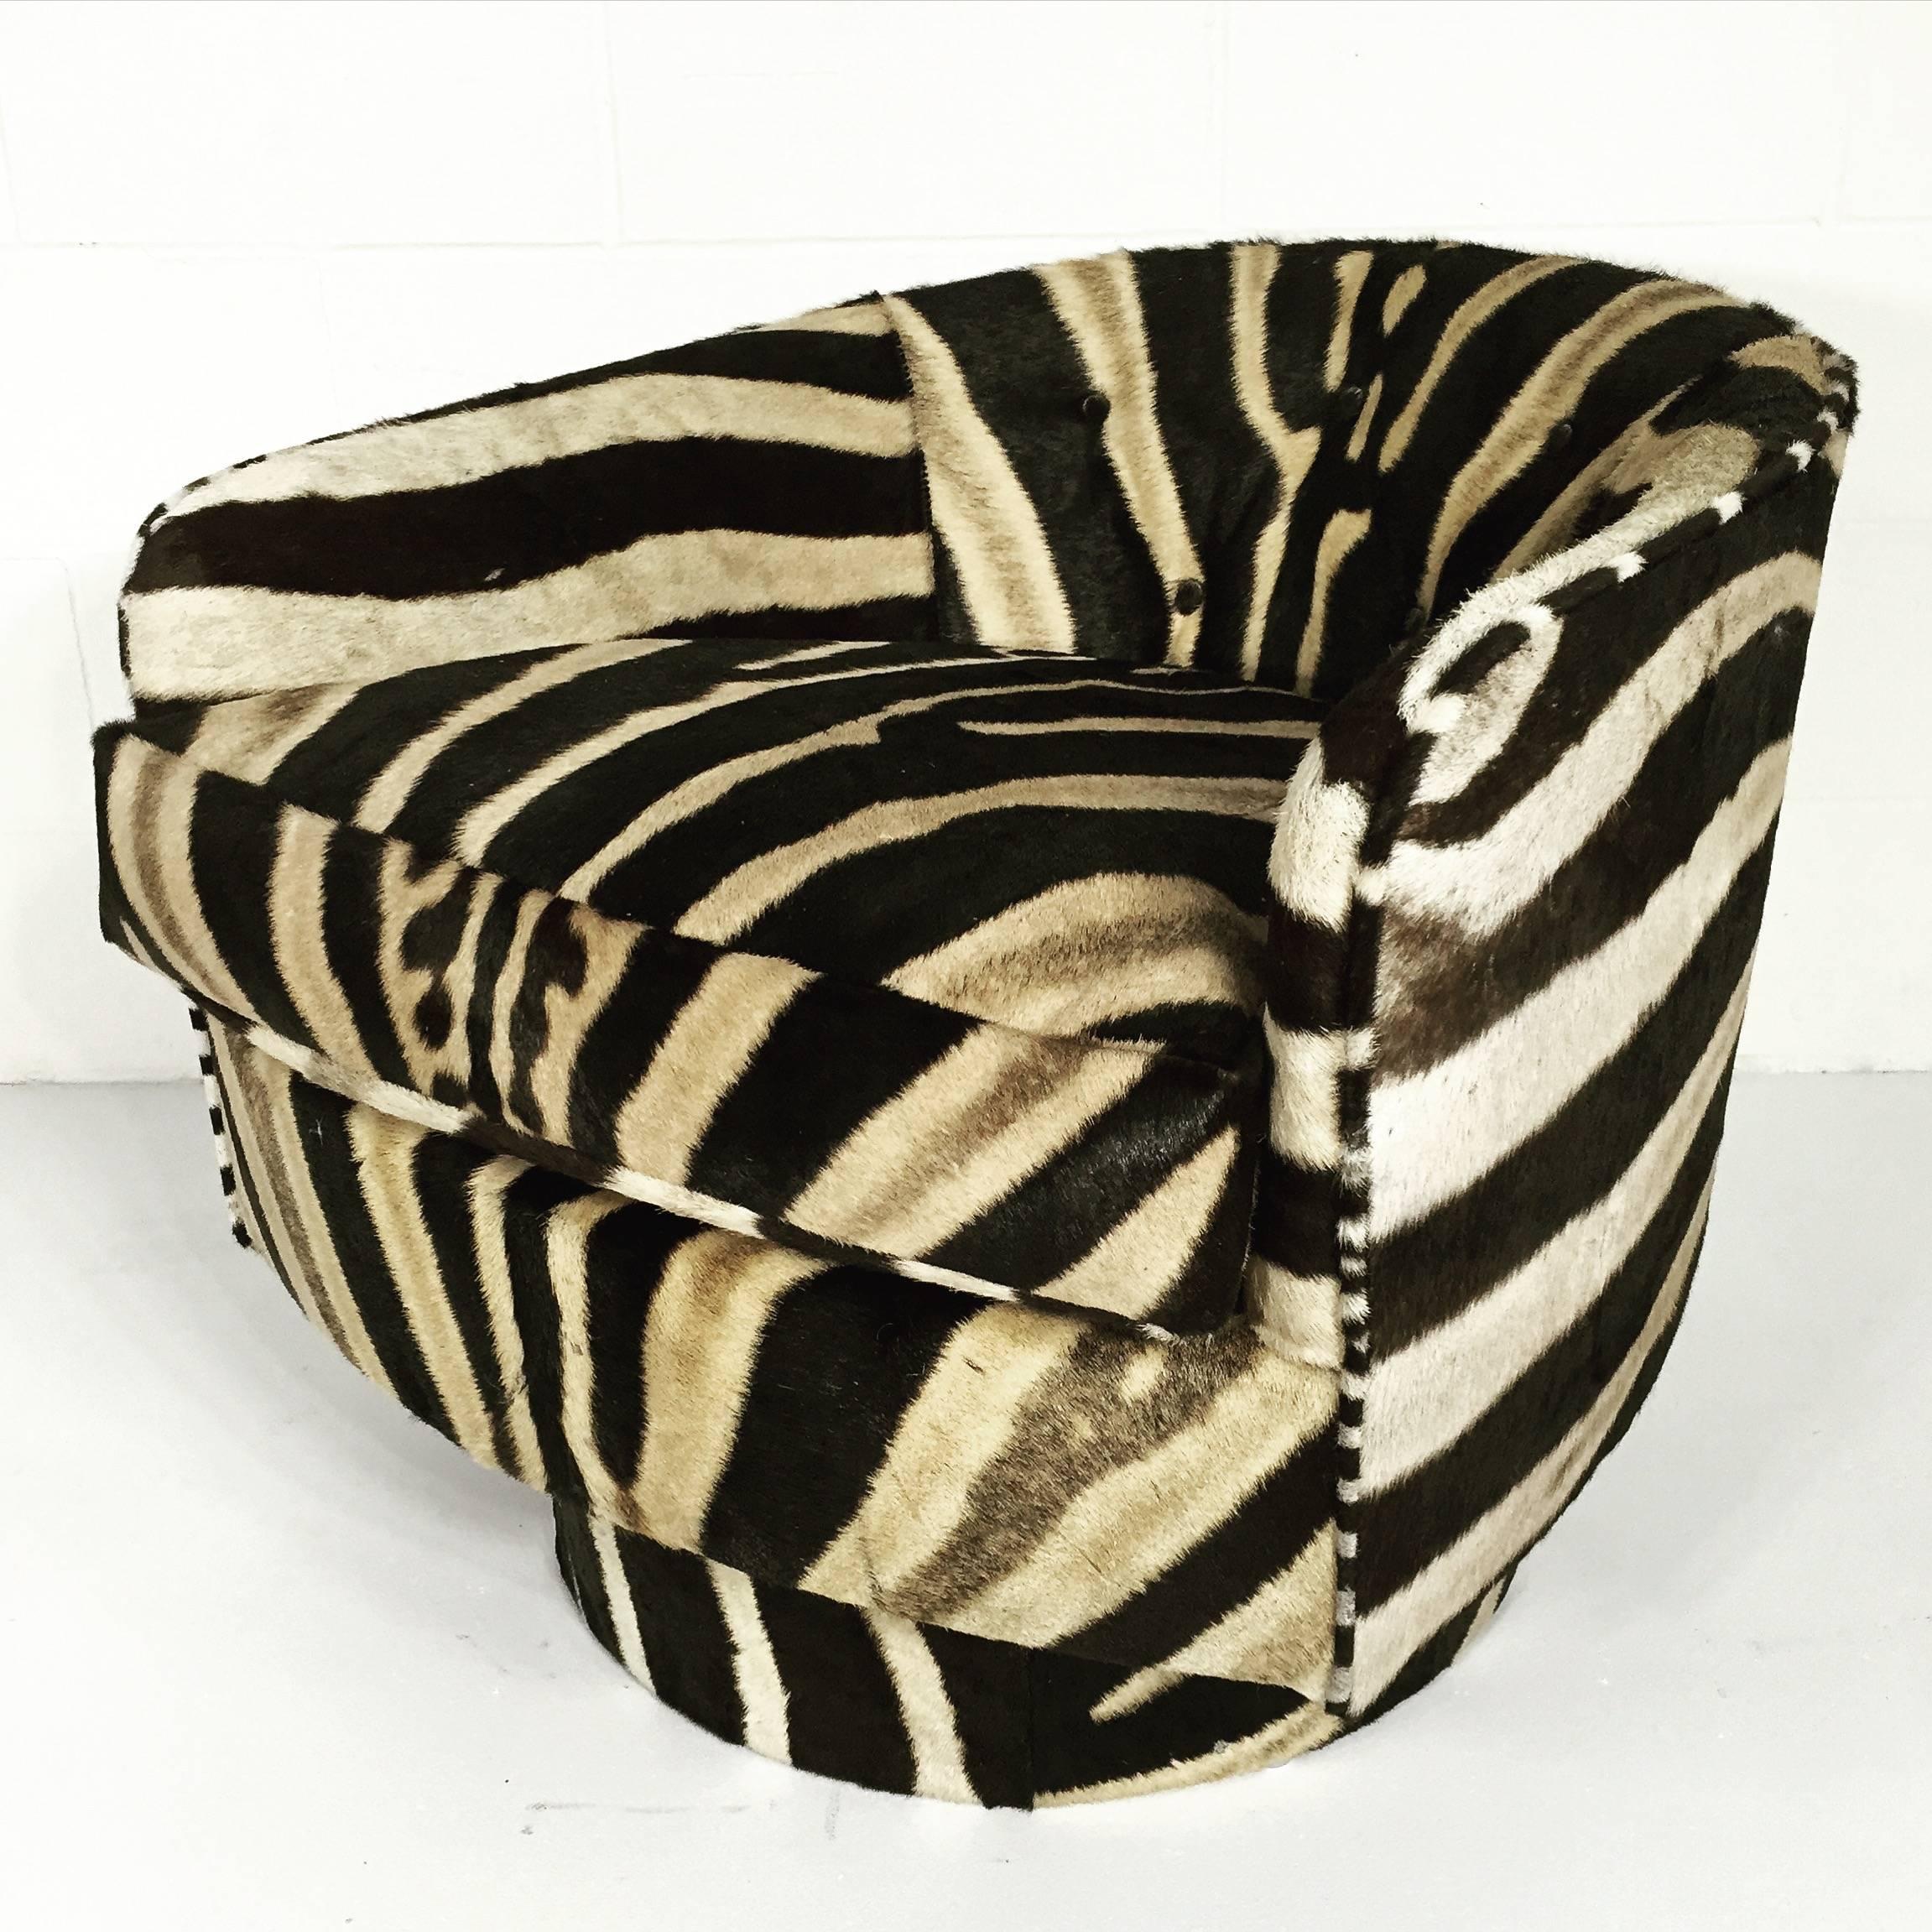 These chairs should be the star of a MOMA exhibition! Milo Baughman’s designs were original, architectural and Classic. A matching pair of Baughman swivel chairs is a rare statement; the zebra hide brings them into a whole new design stratosphere.